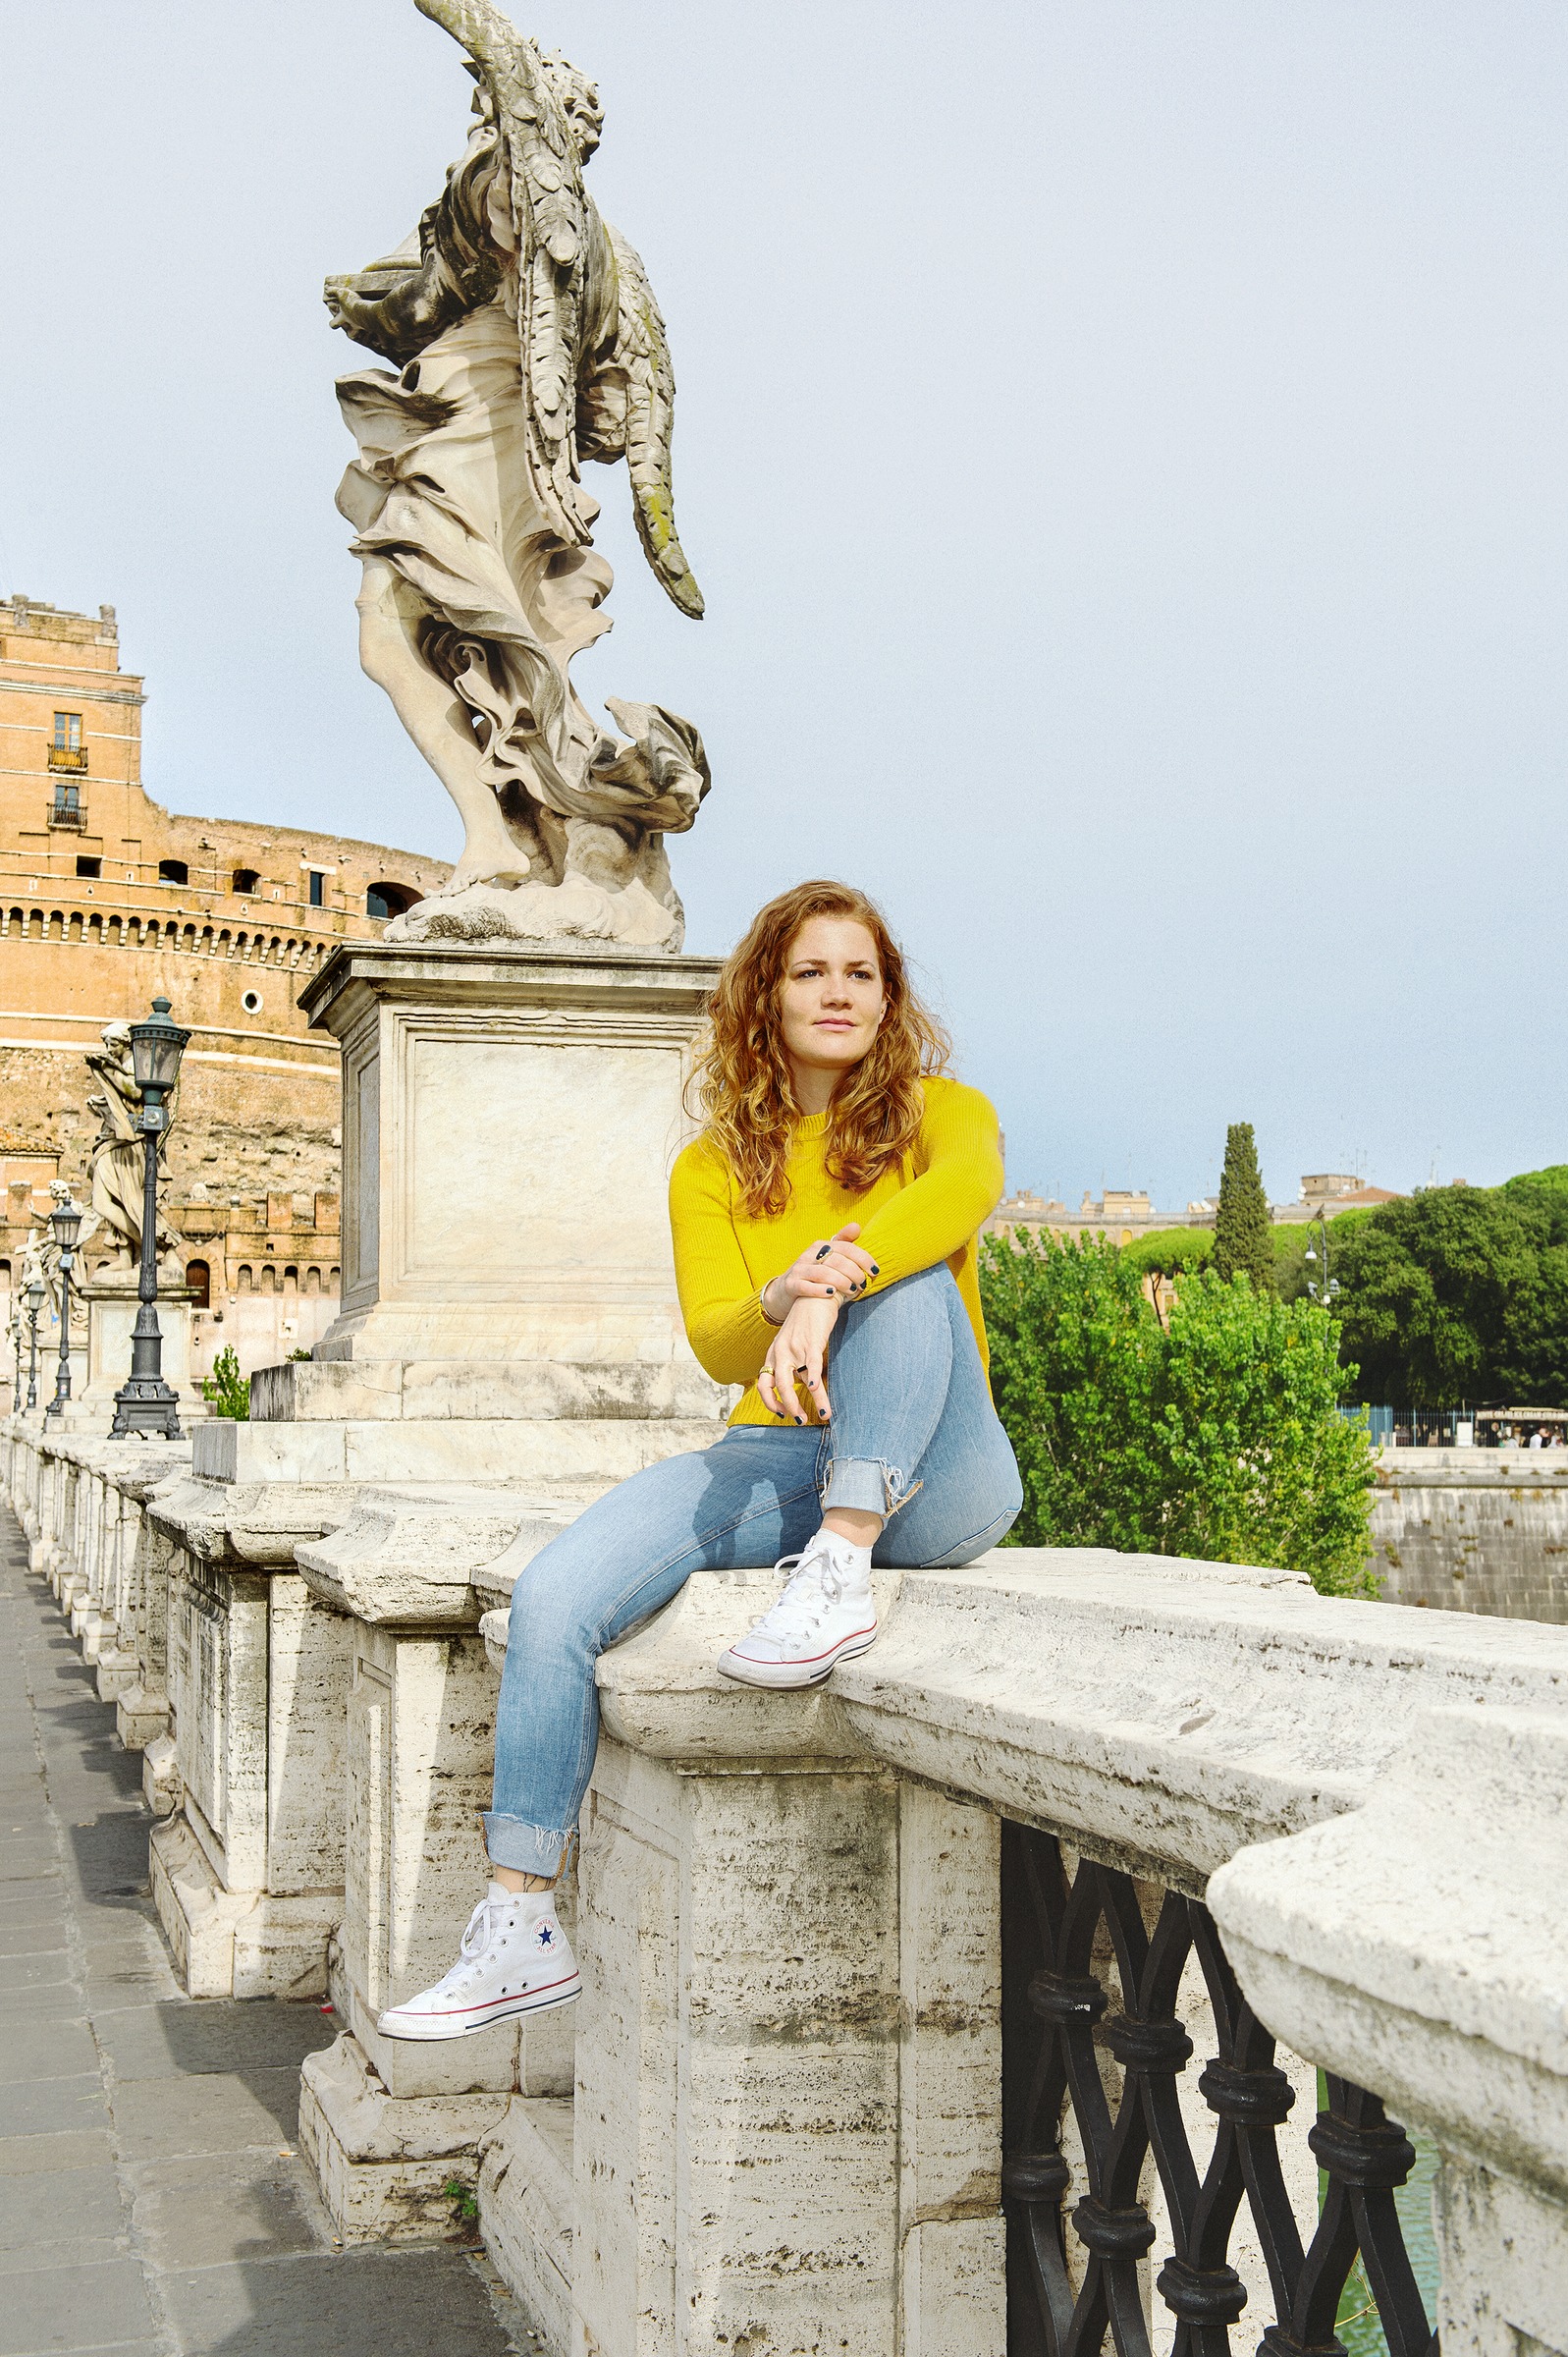 Whitney Green doesn't see herself returning to an office; after four years as a community therapist, she quit to move to Rome and is living off her savings. (Stephanie Gengotti for TIME)